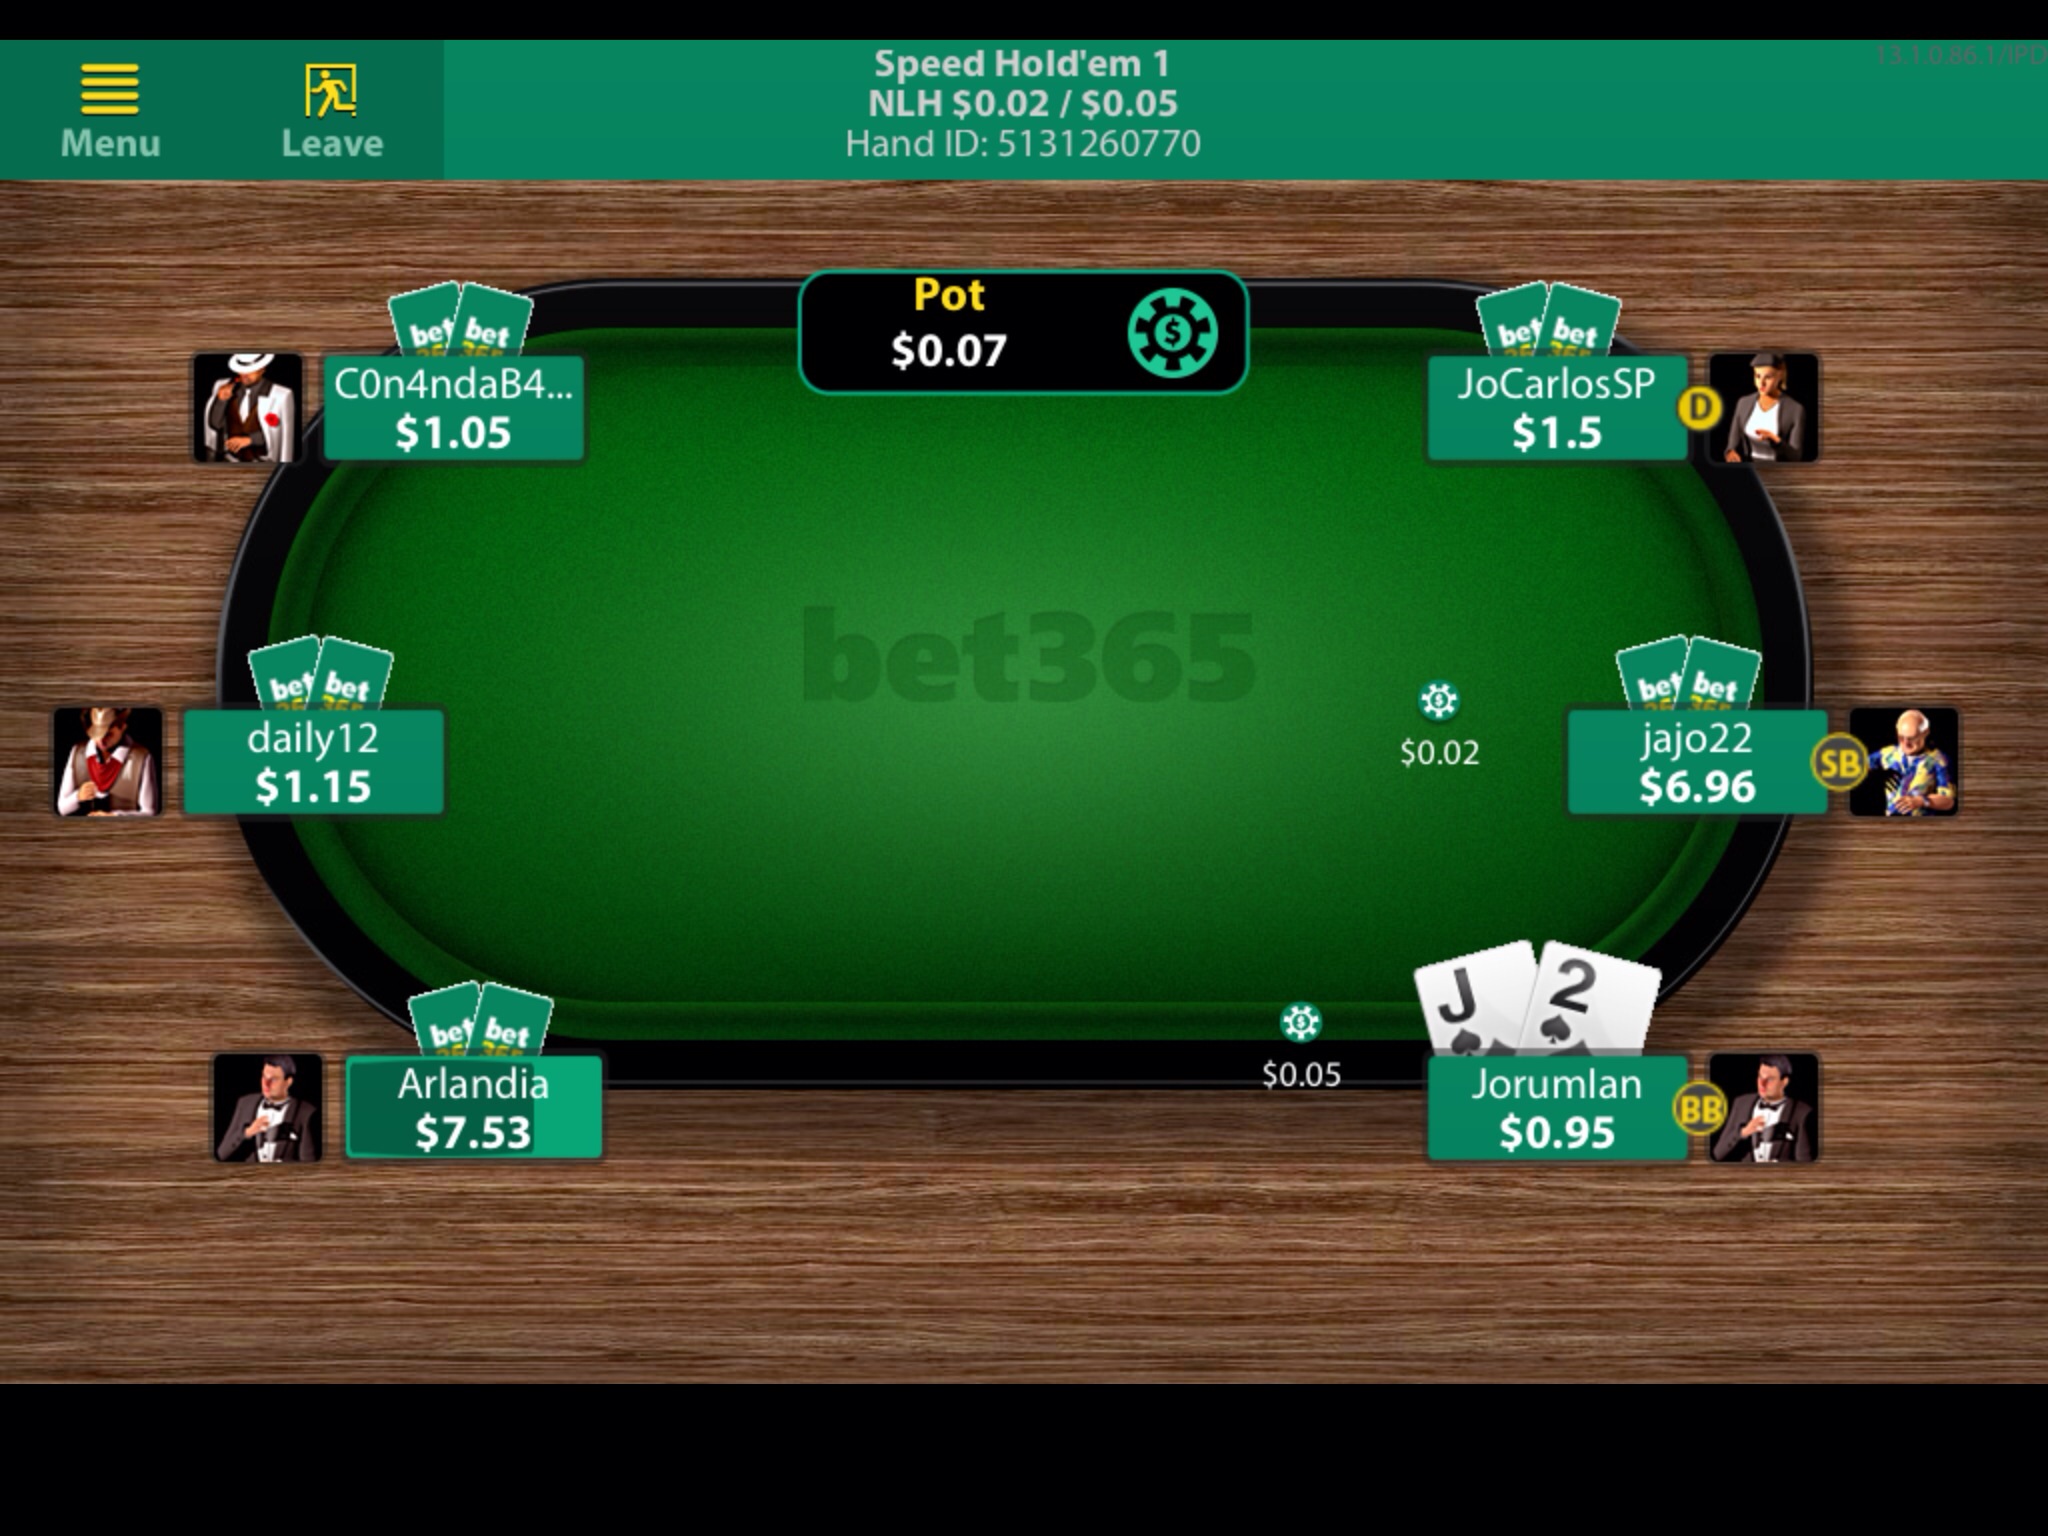 Get In On The Action At Bet365, India's Best Online Casino